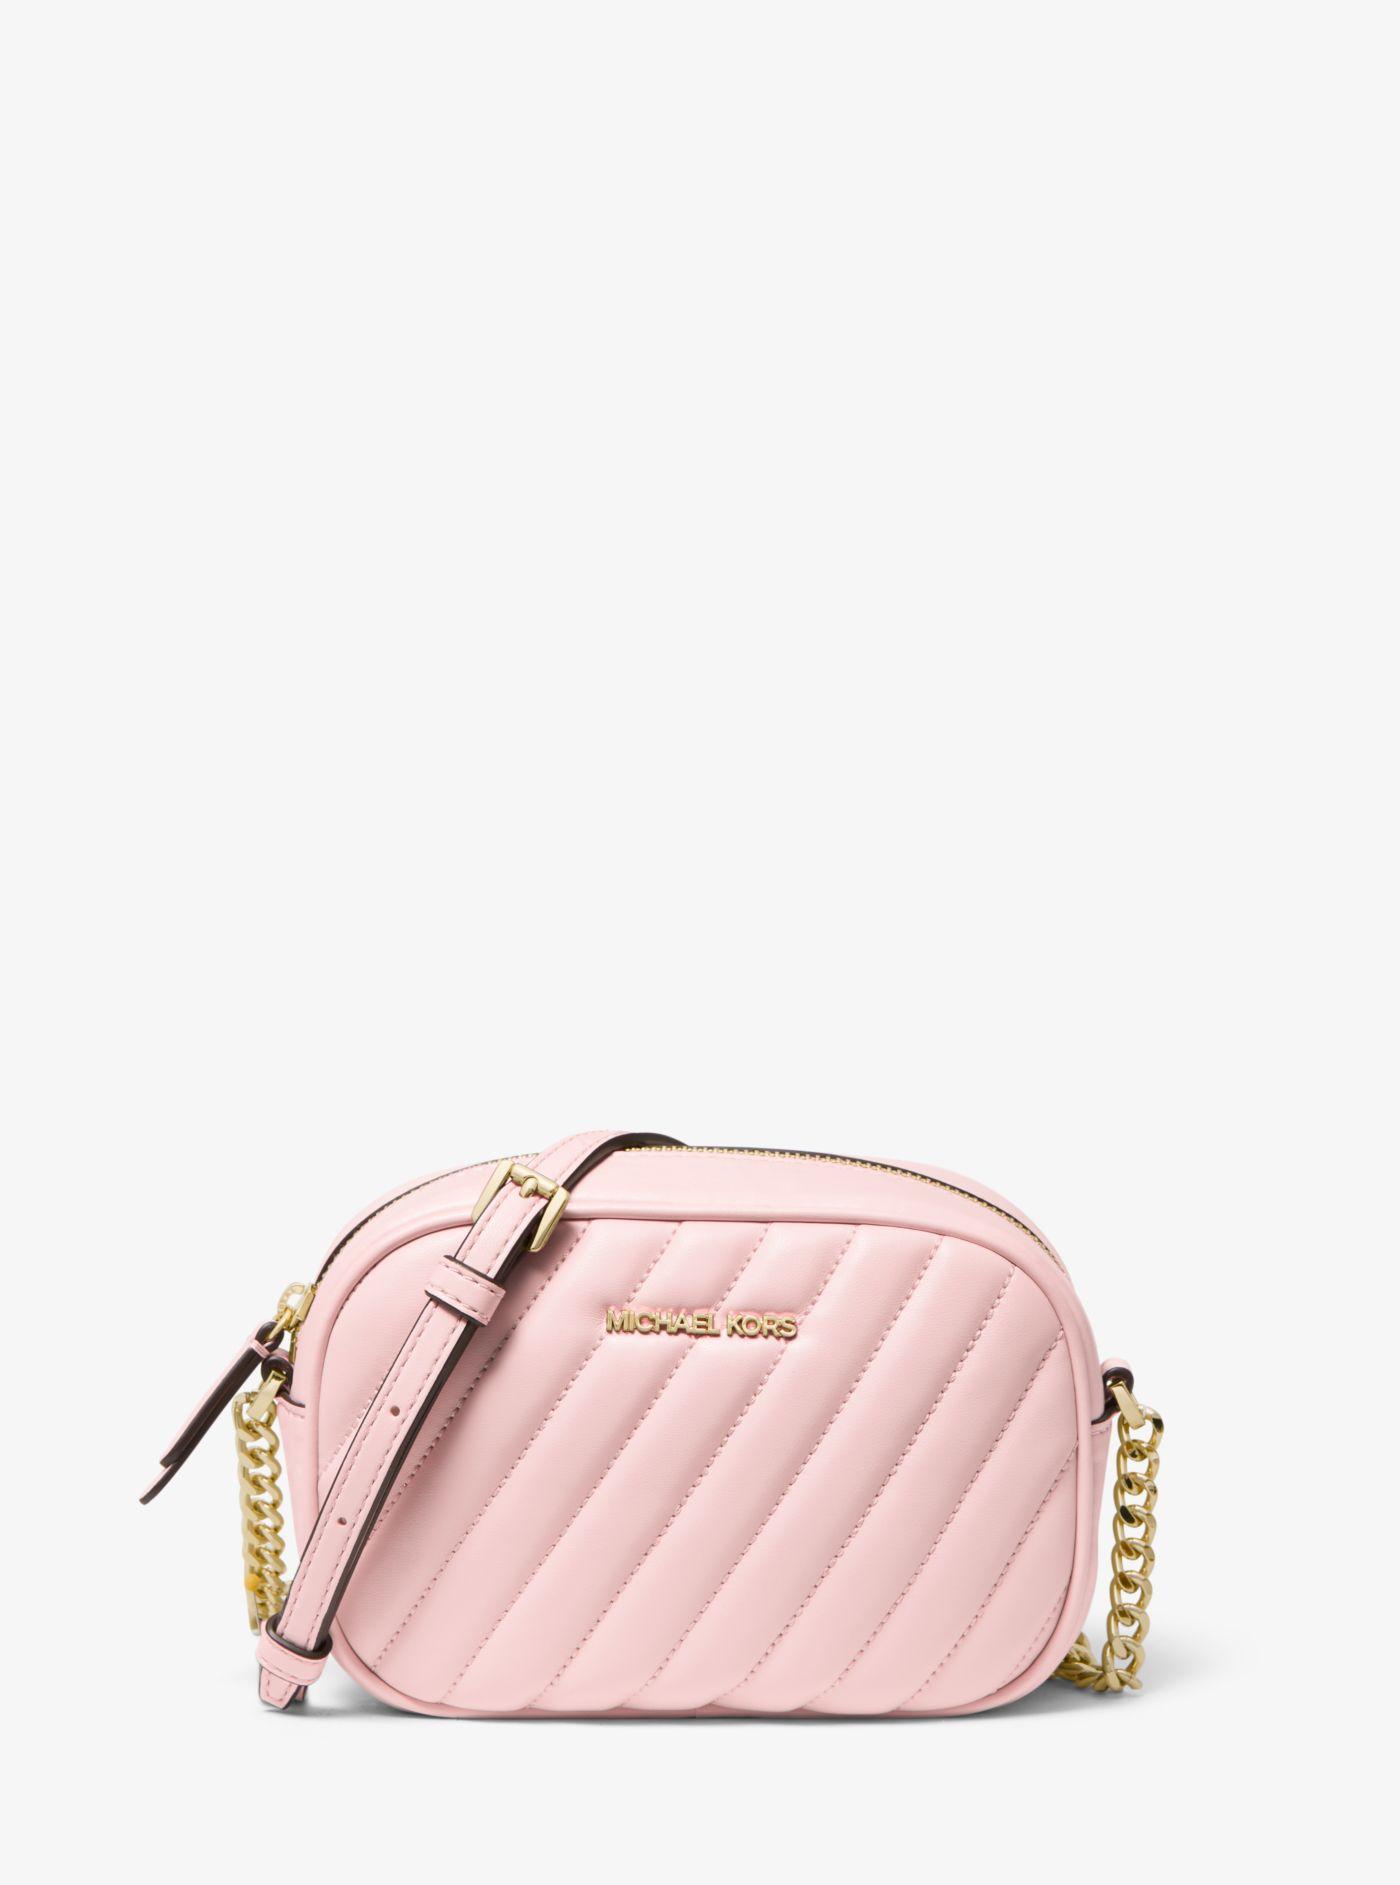 Michael Kors Rose Small Quilted Crossbody Bag in Pink | Lyst